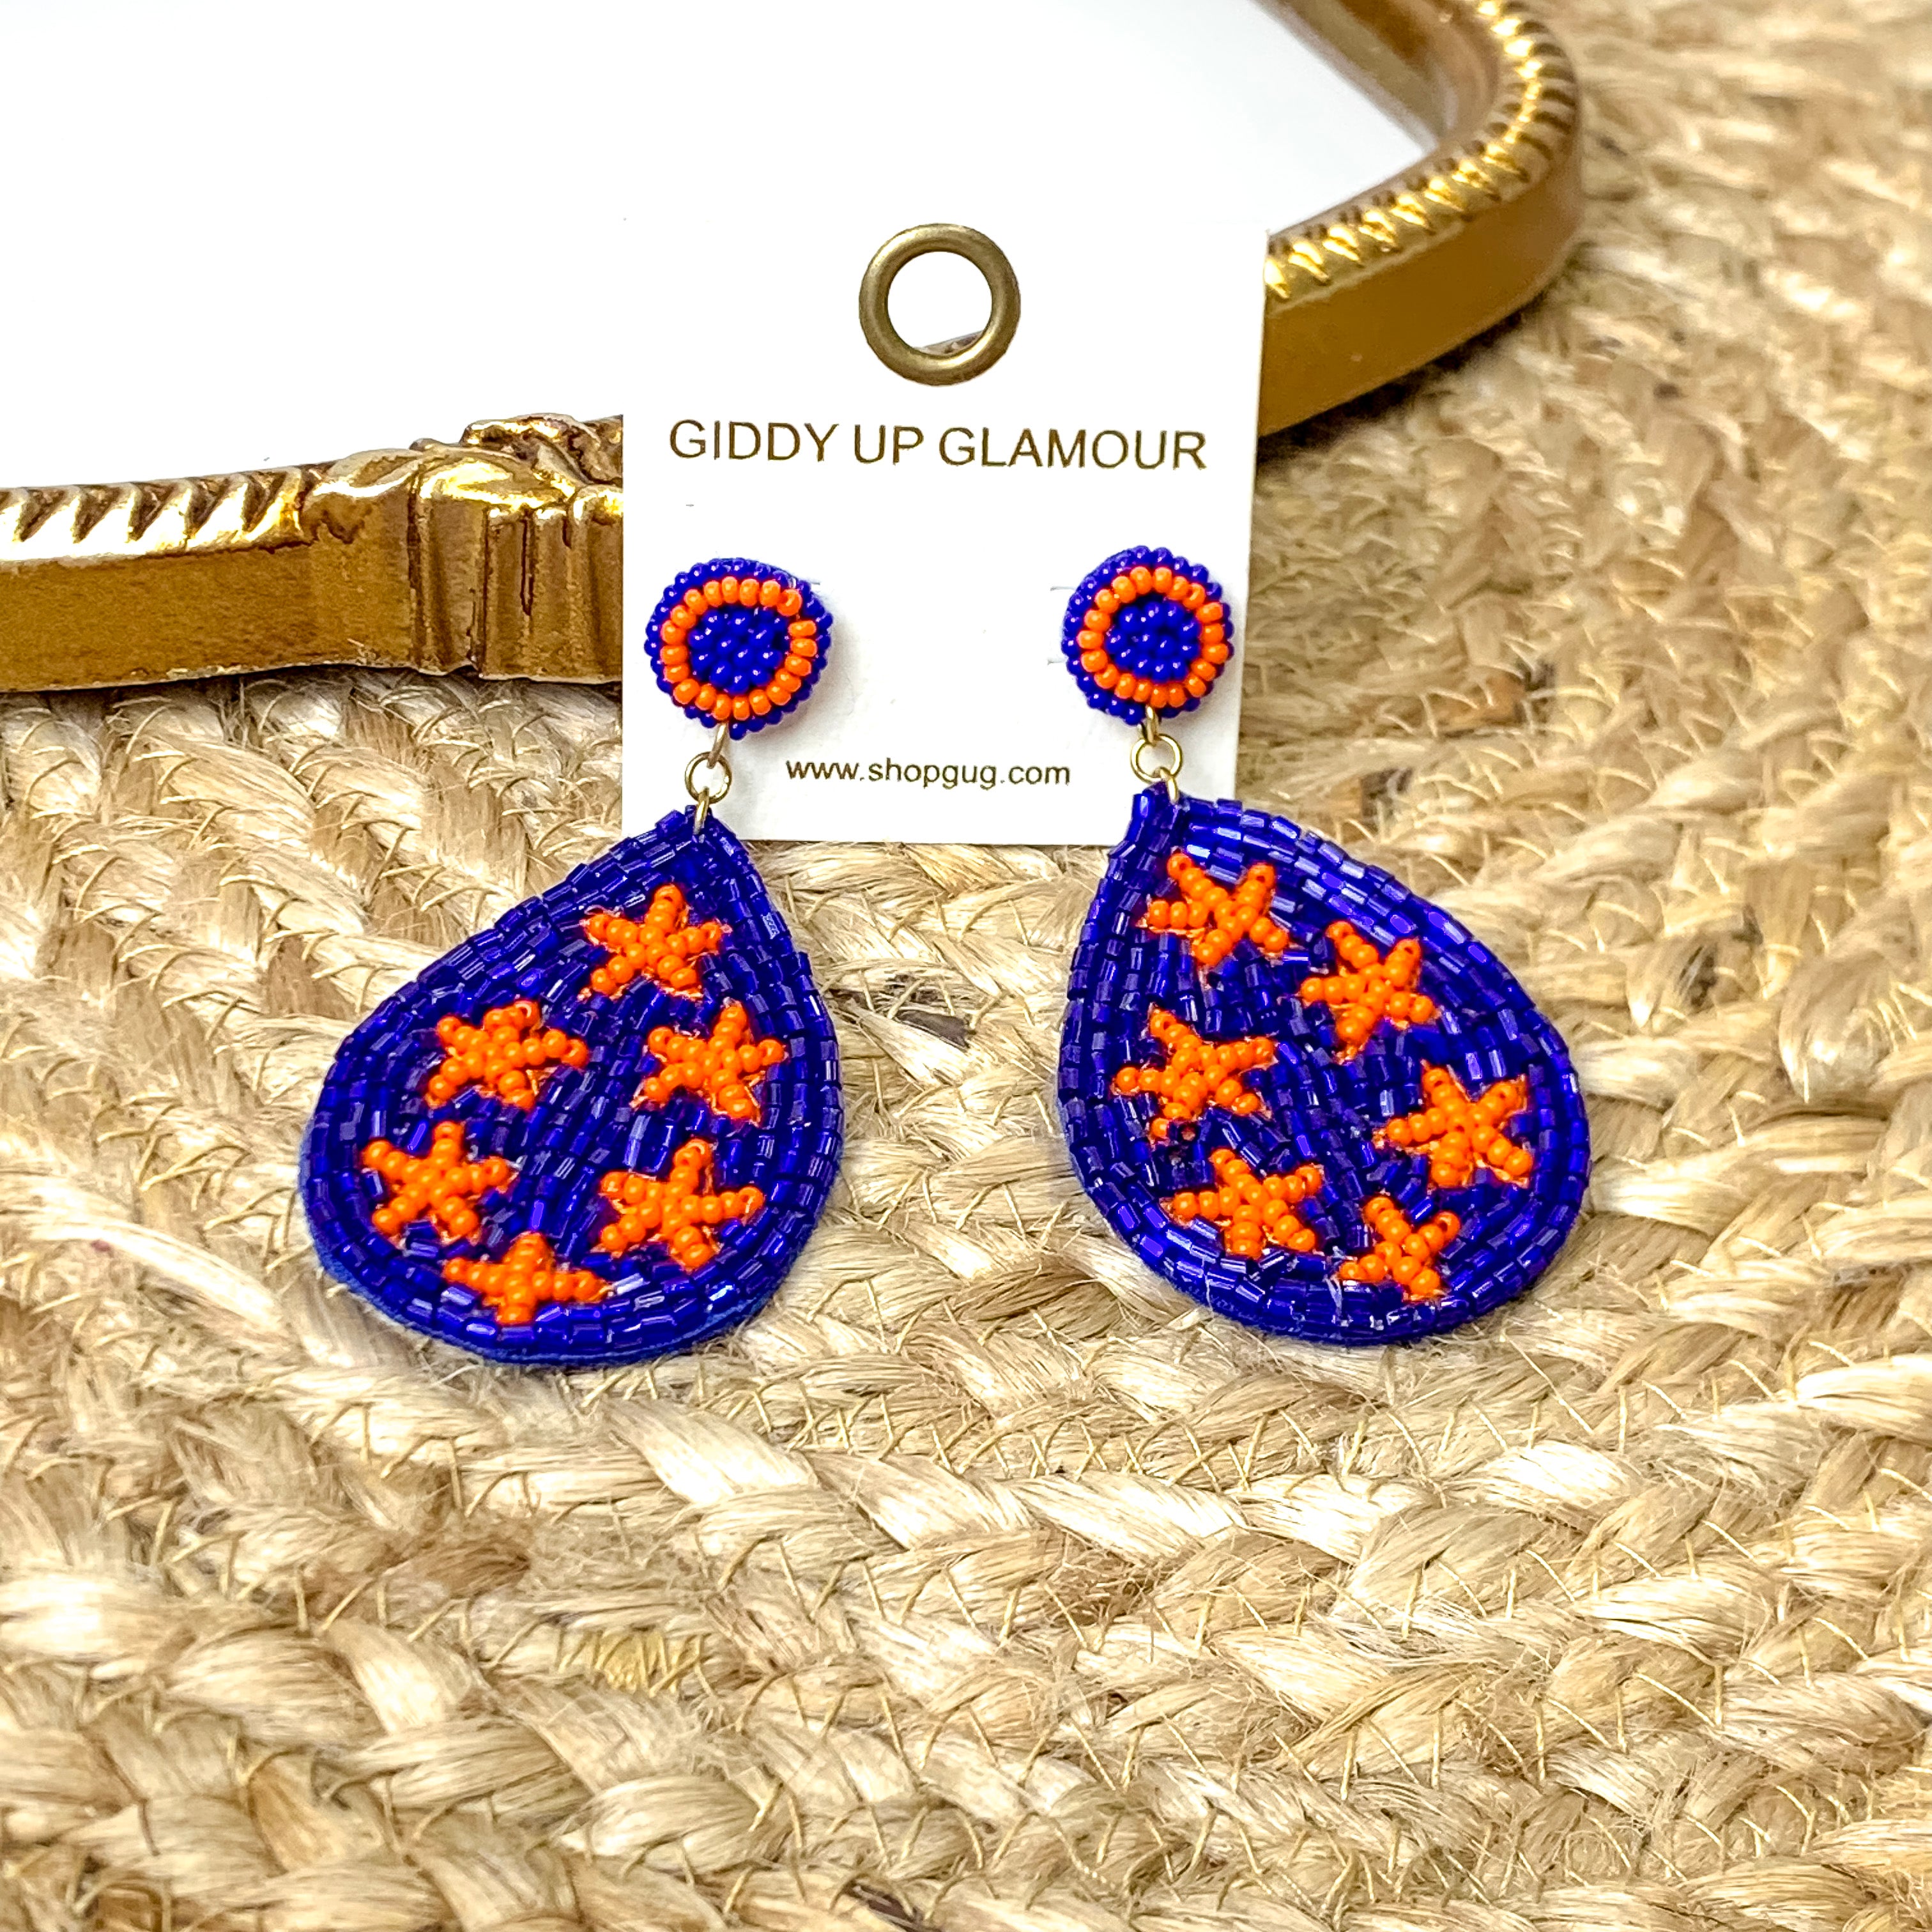 Beaded Teardrop Dangle Earrings with Stars in Blue and Orange - Giddy Up Glamour Boutique